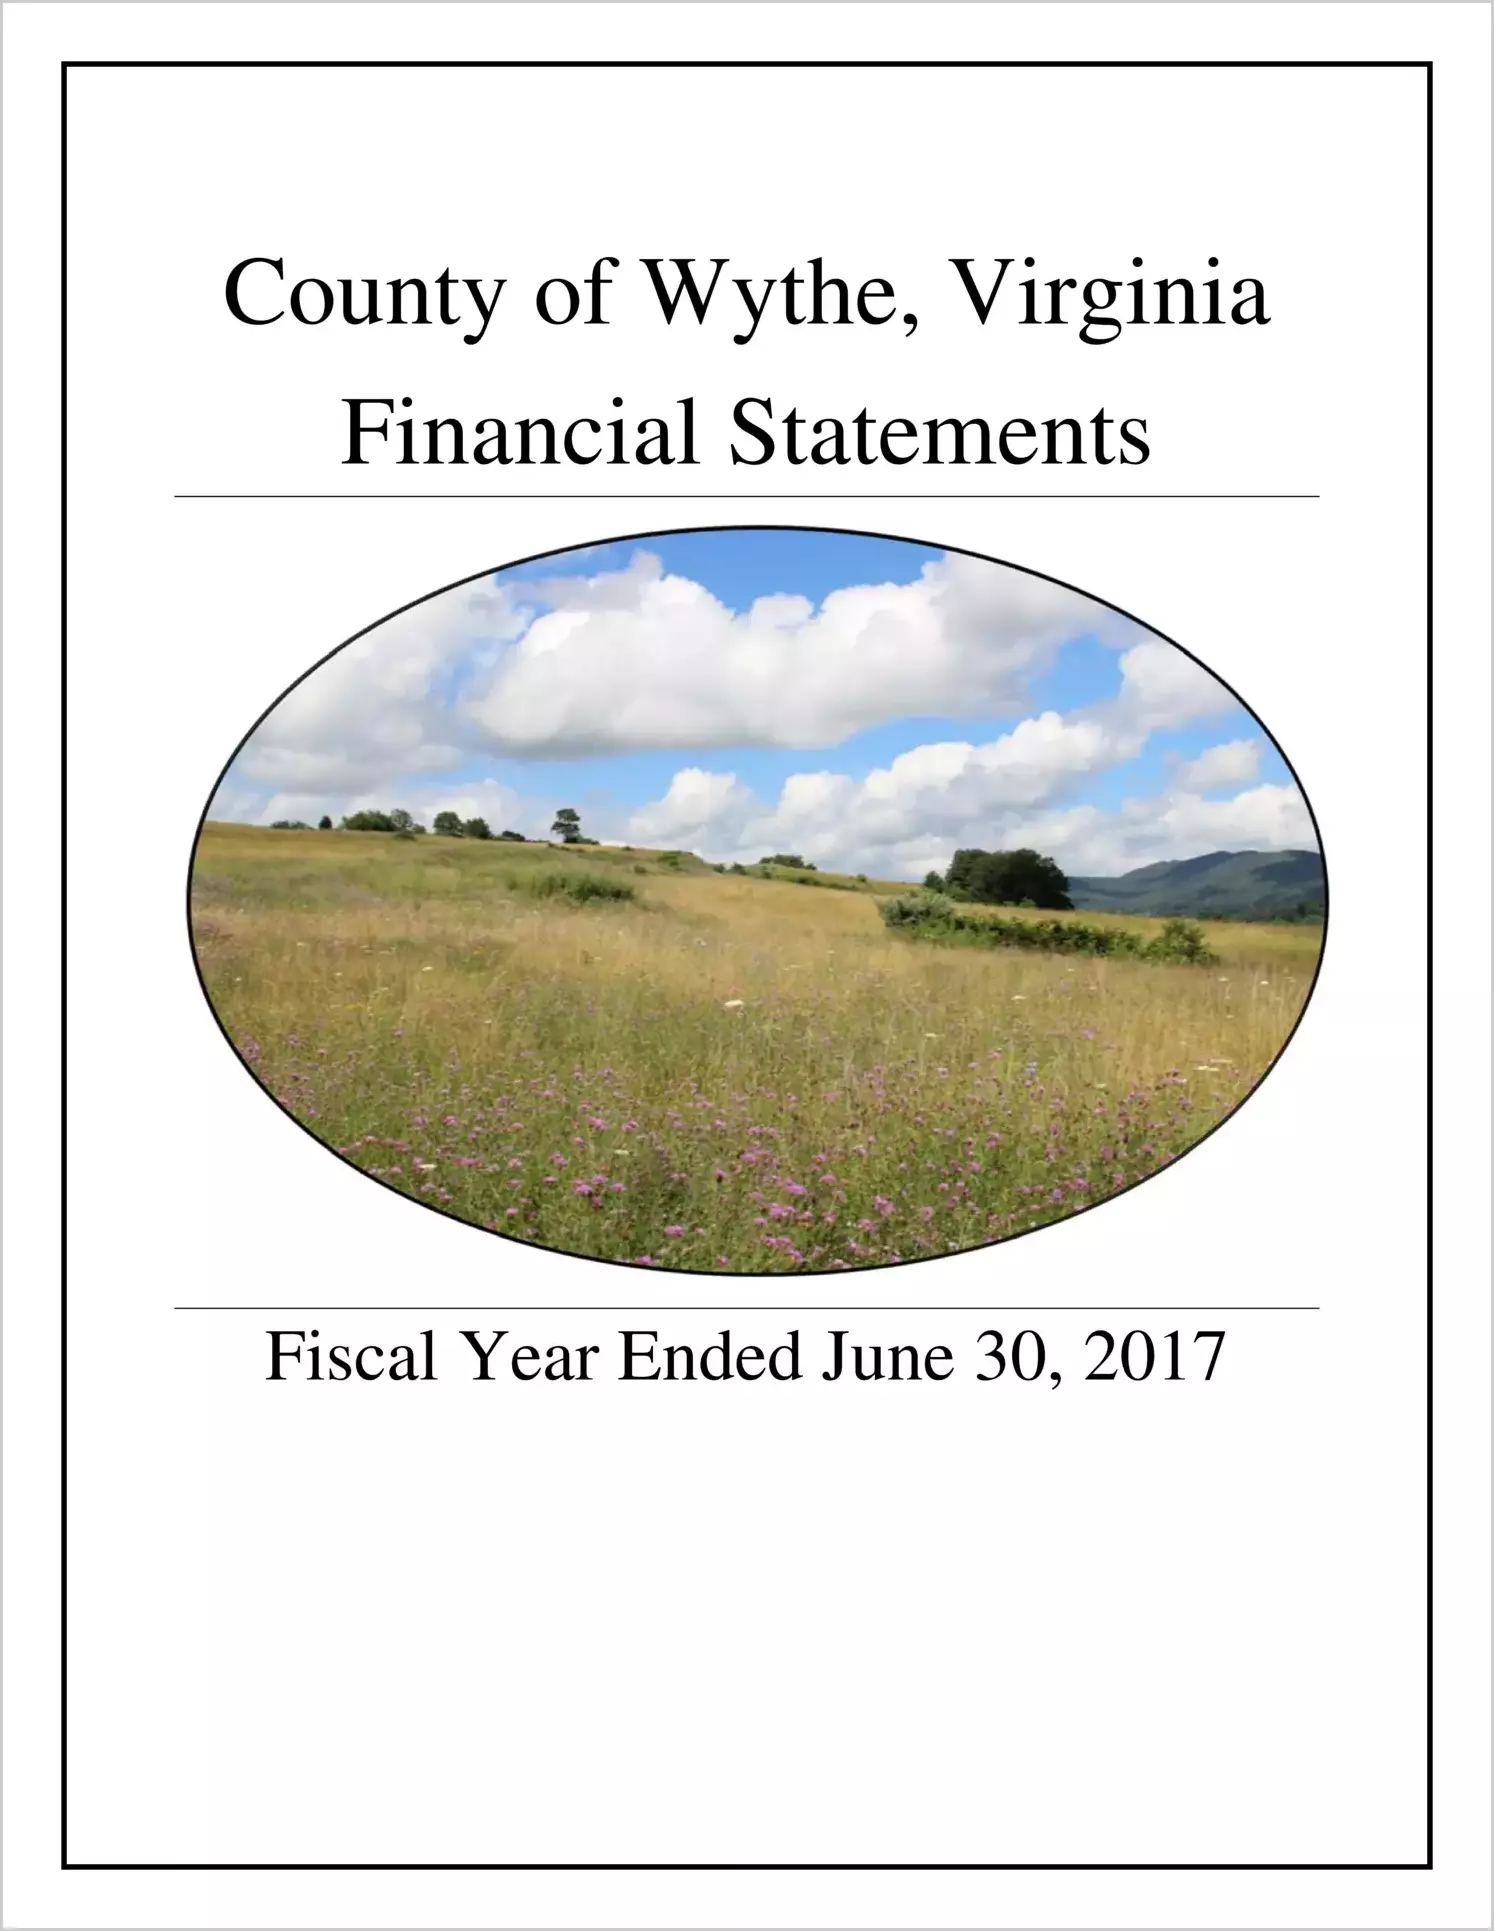 2017 Annual Financial Report for County of Wythe